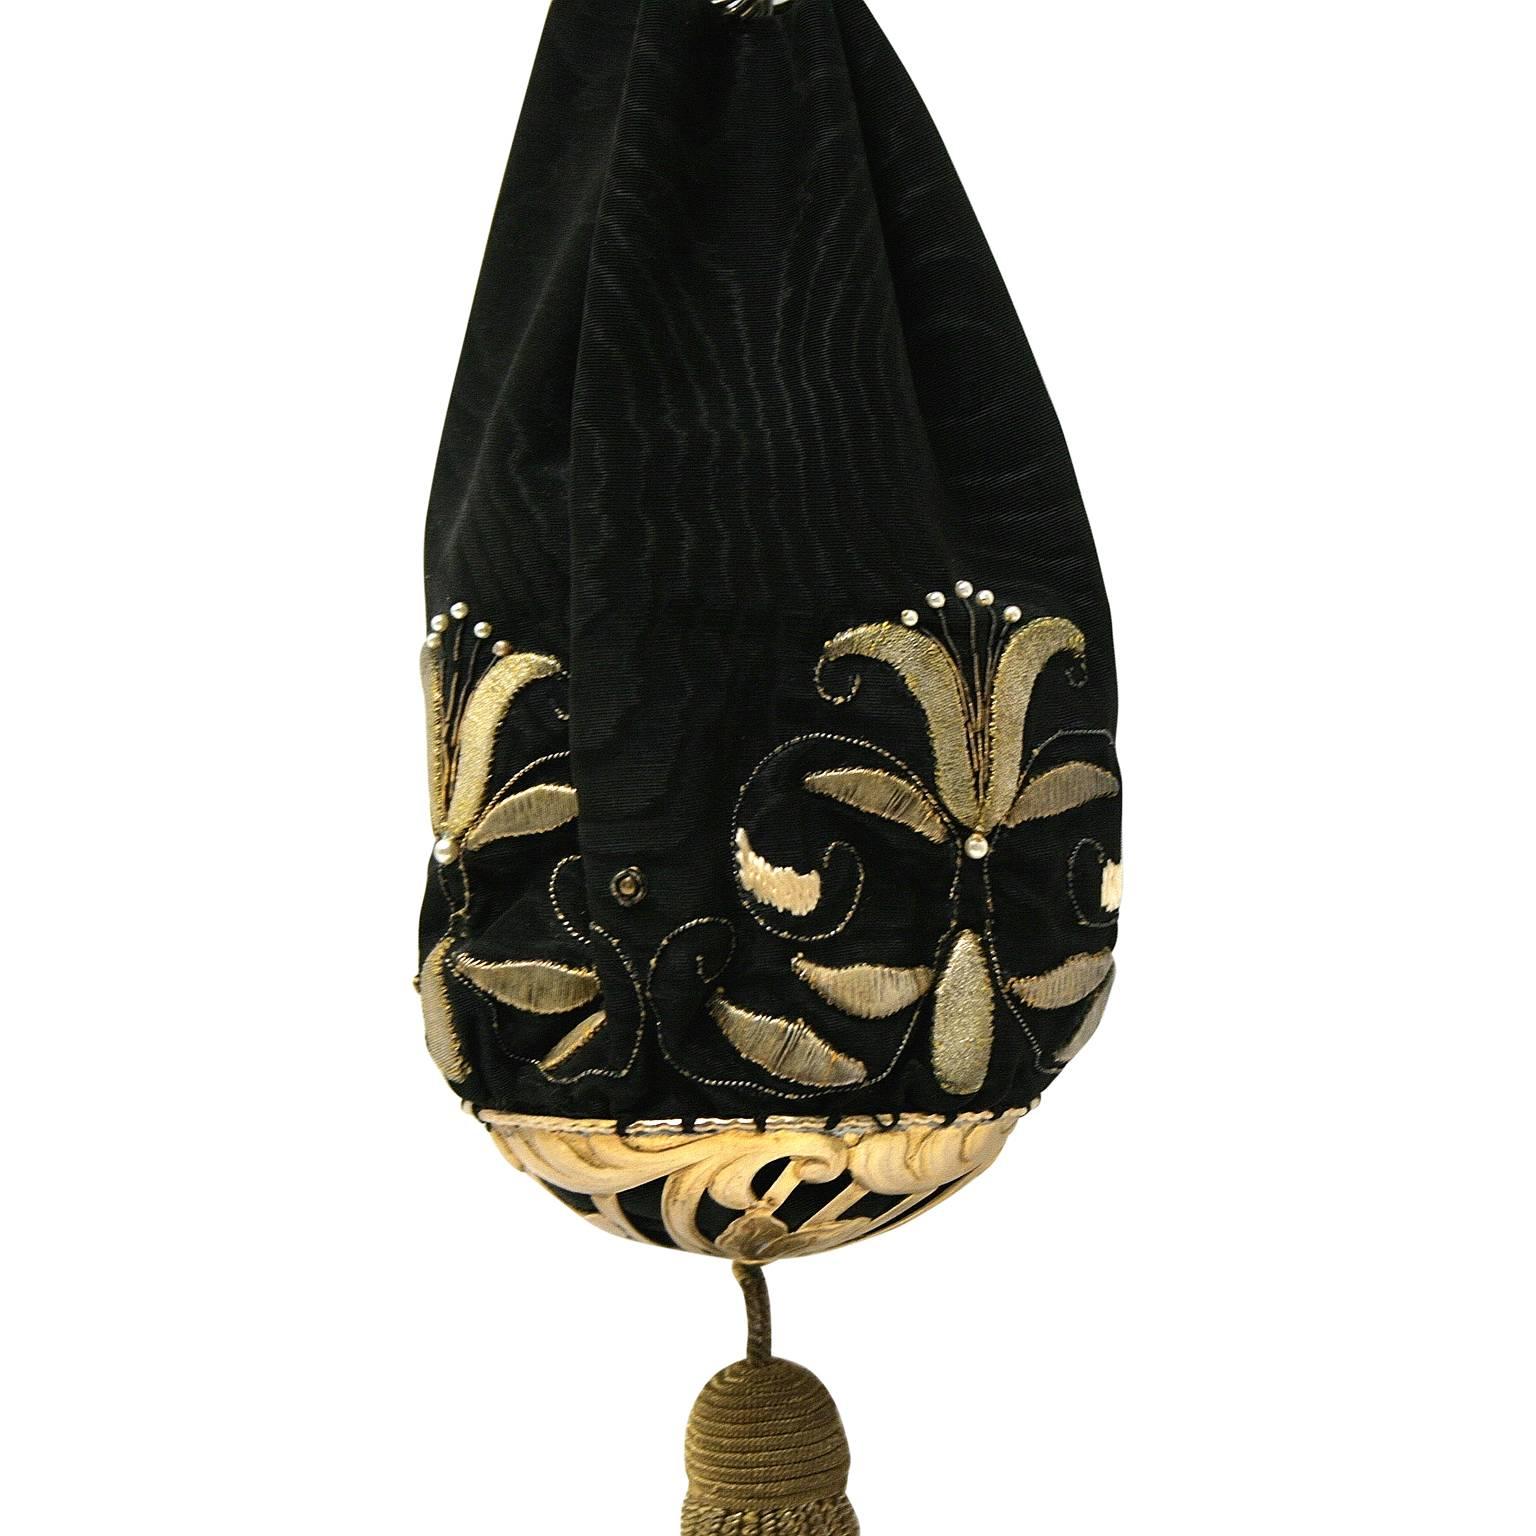 1900s Art Nouveau Black Silk and Gilt Metal Decoration Vintage Evening Bag In Good Condition For Sale In Wigan, GB